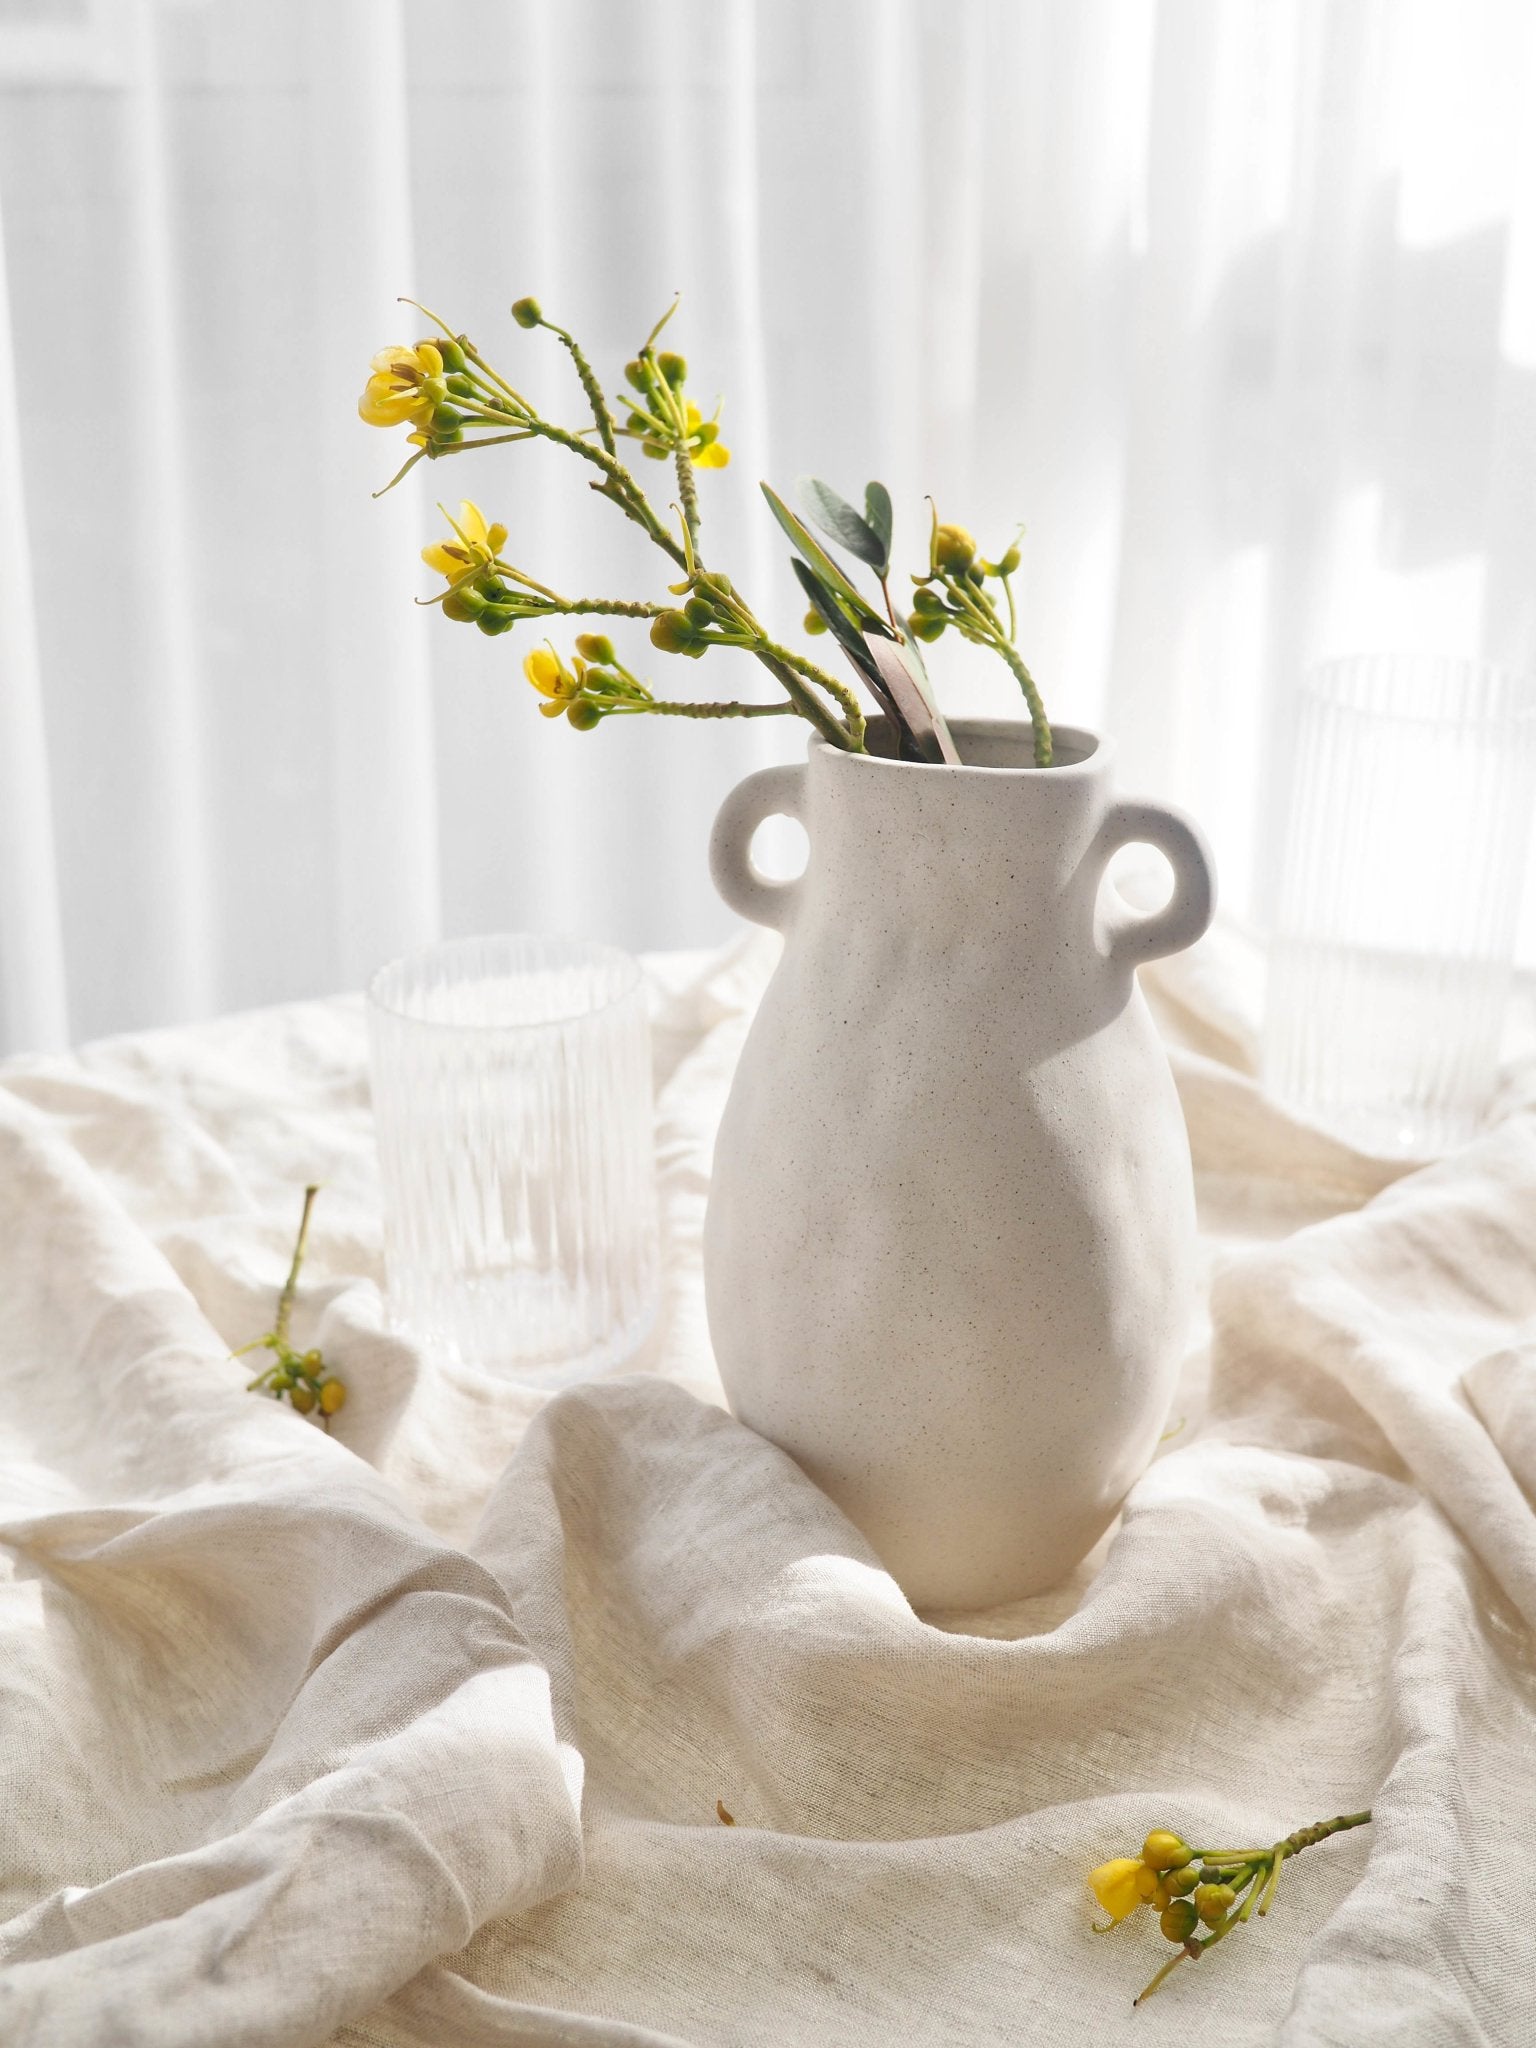 100% Linen Tablecloth - The Sustainable Life